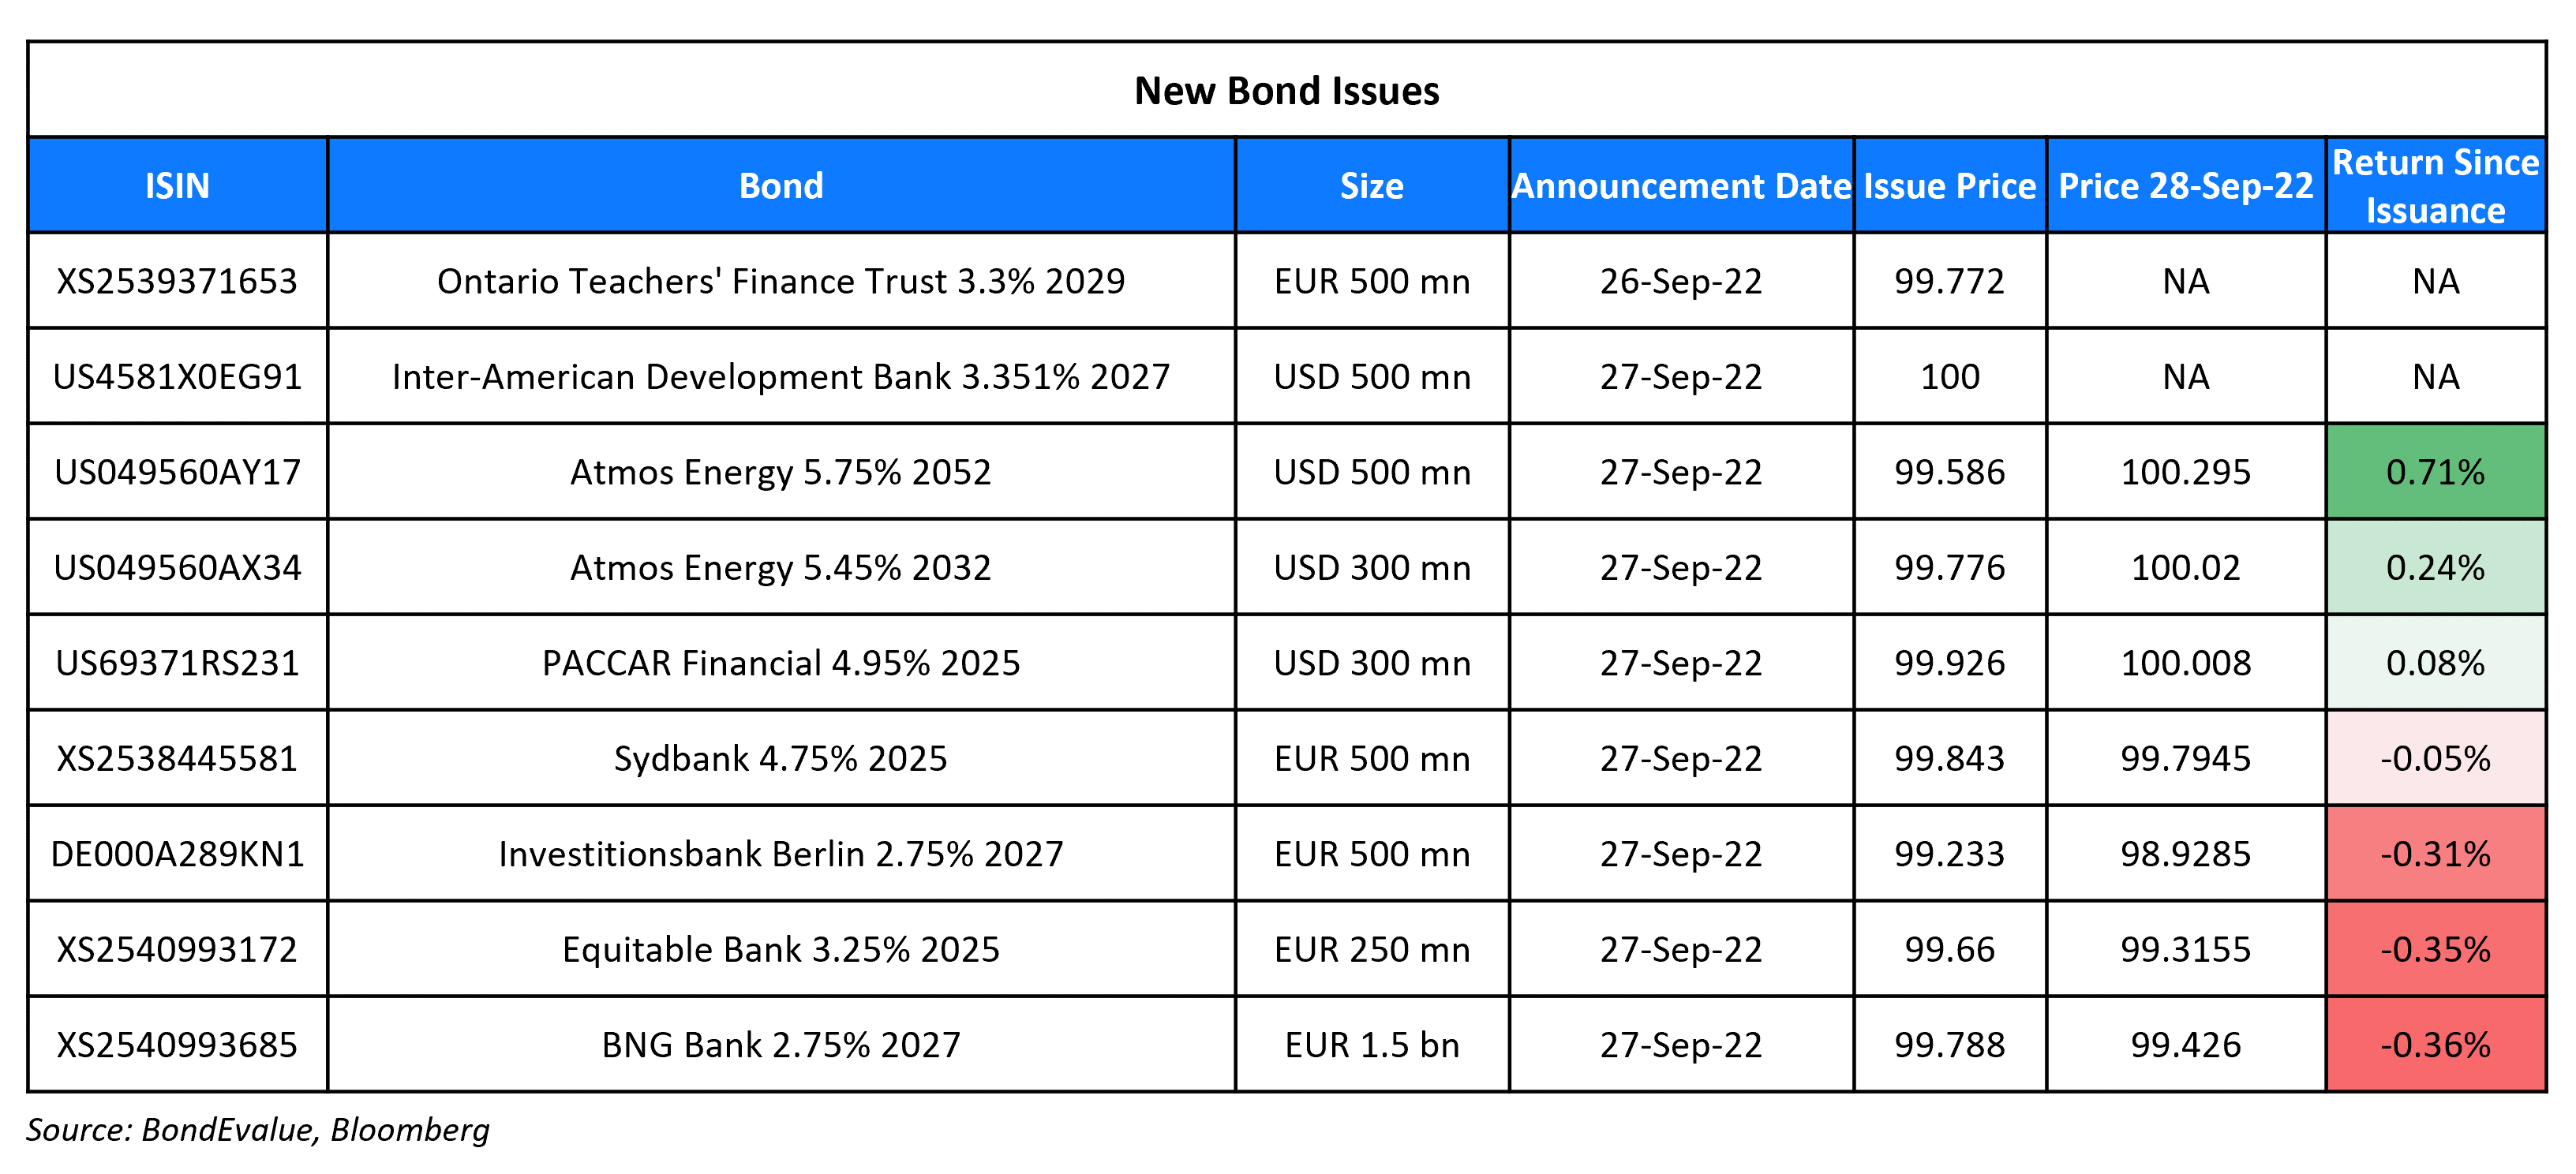 New Bond Issues 28 Sep 22